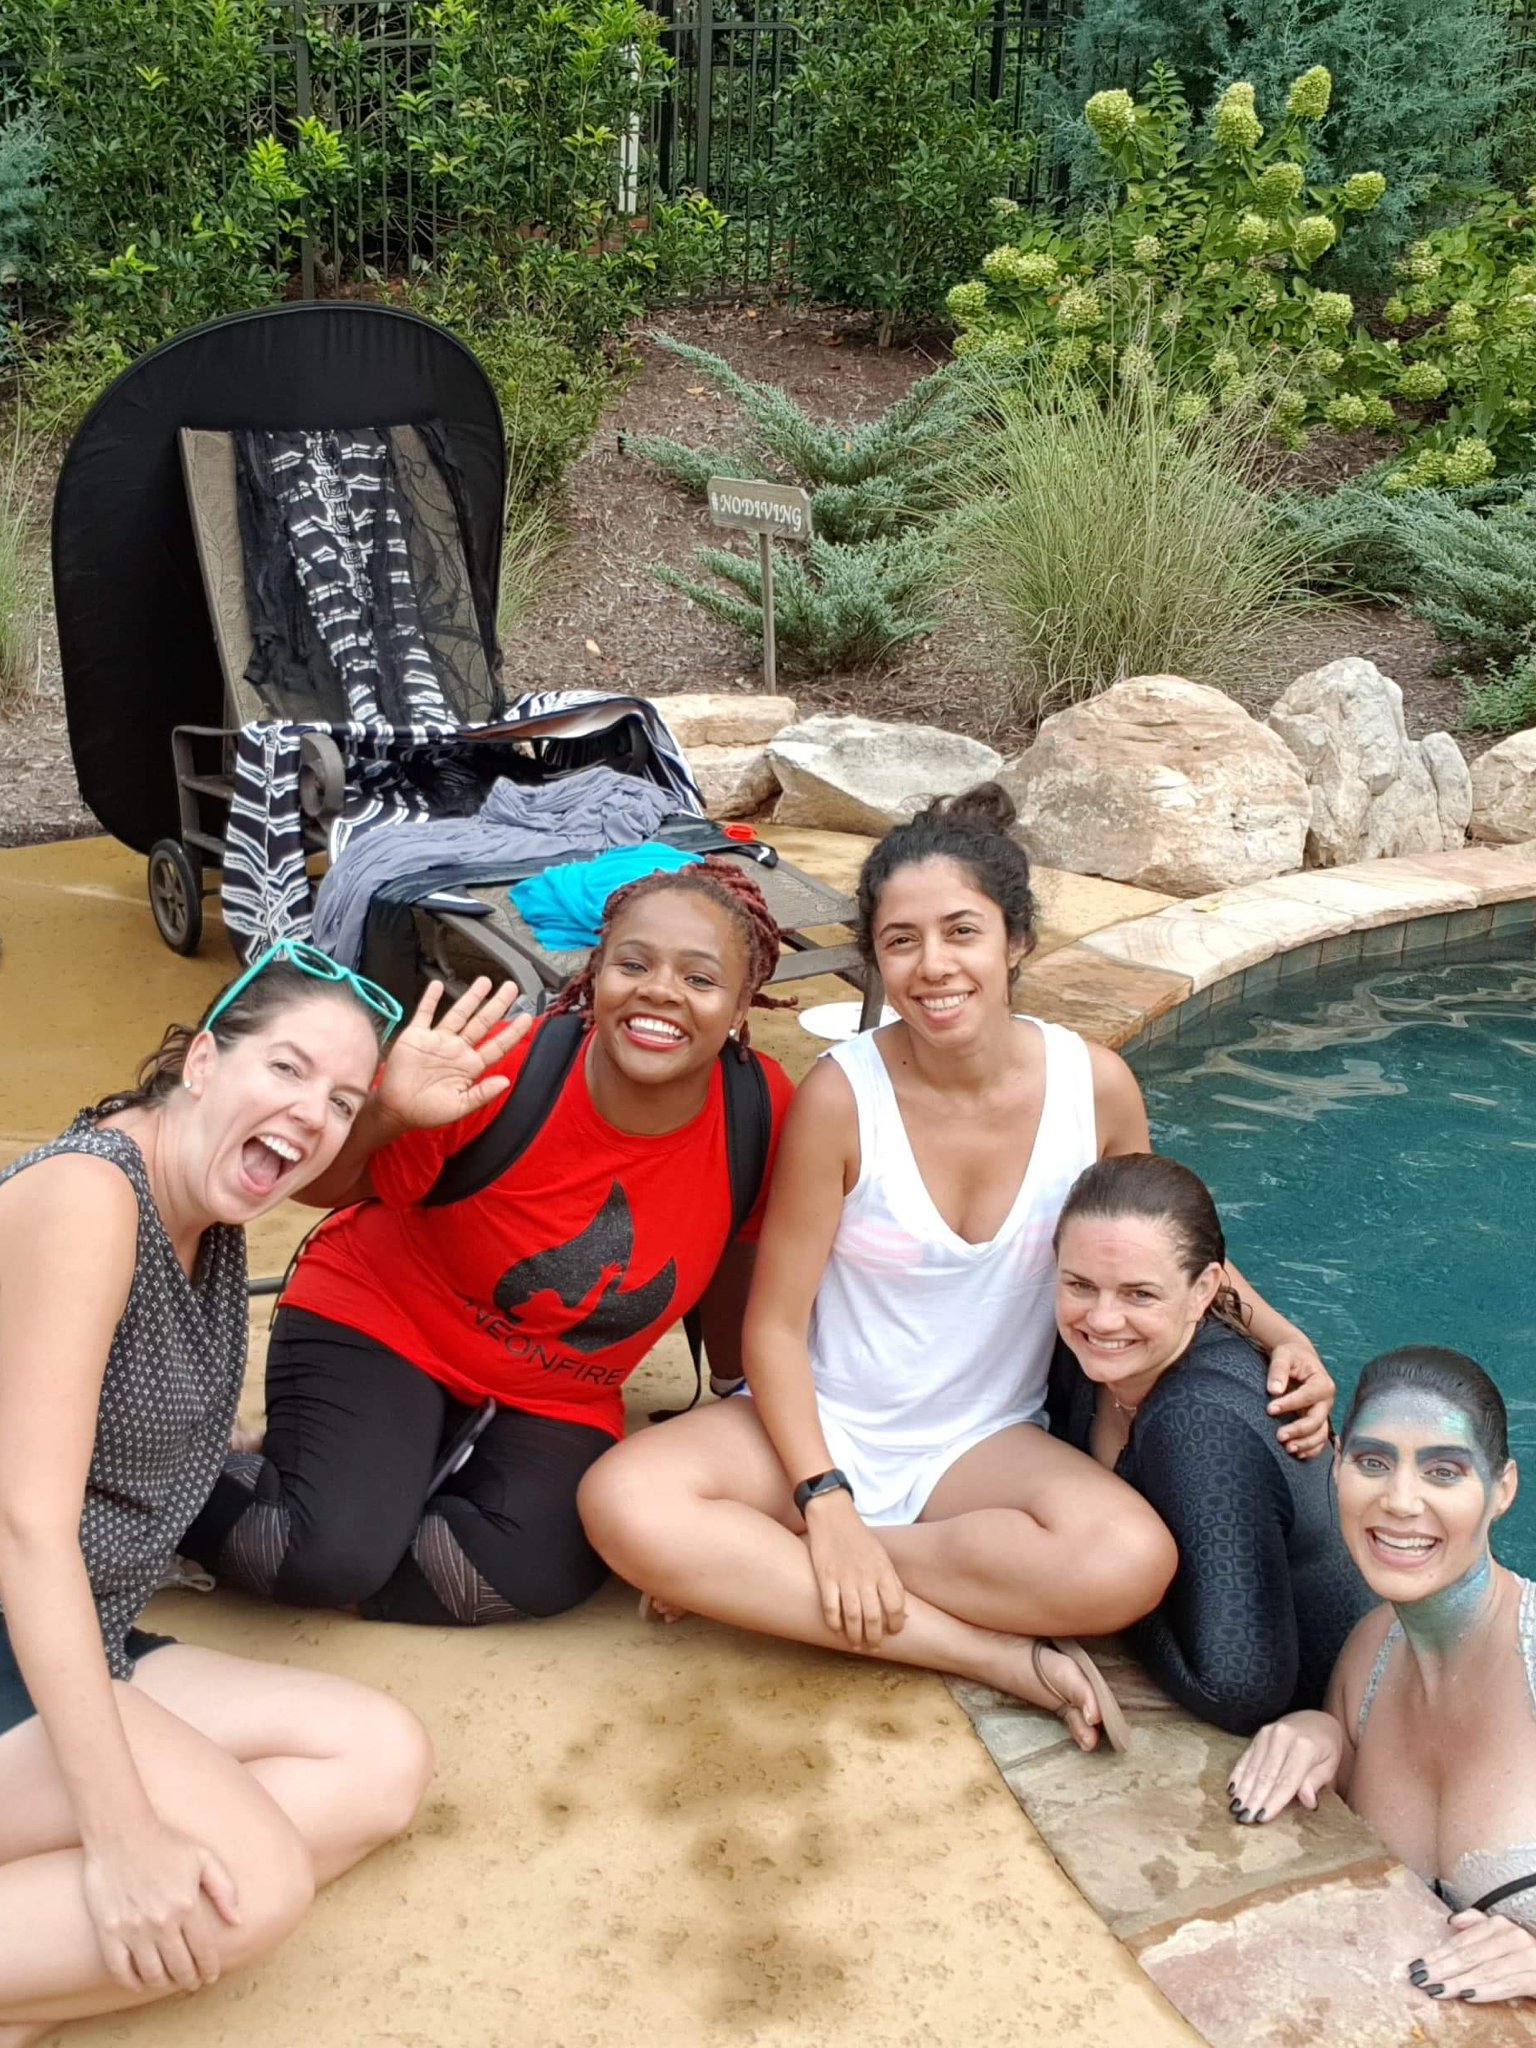 White, Black, and Muslim women by pool after styled underwater Photography mermaid session